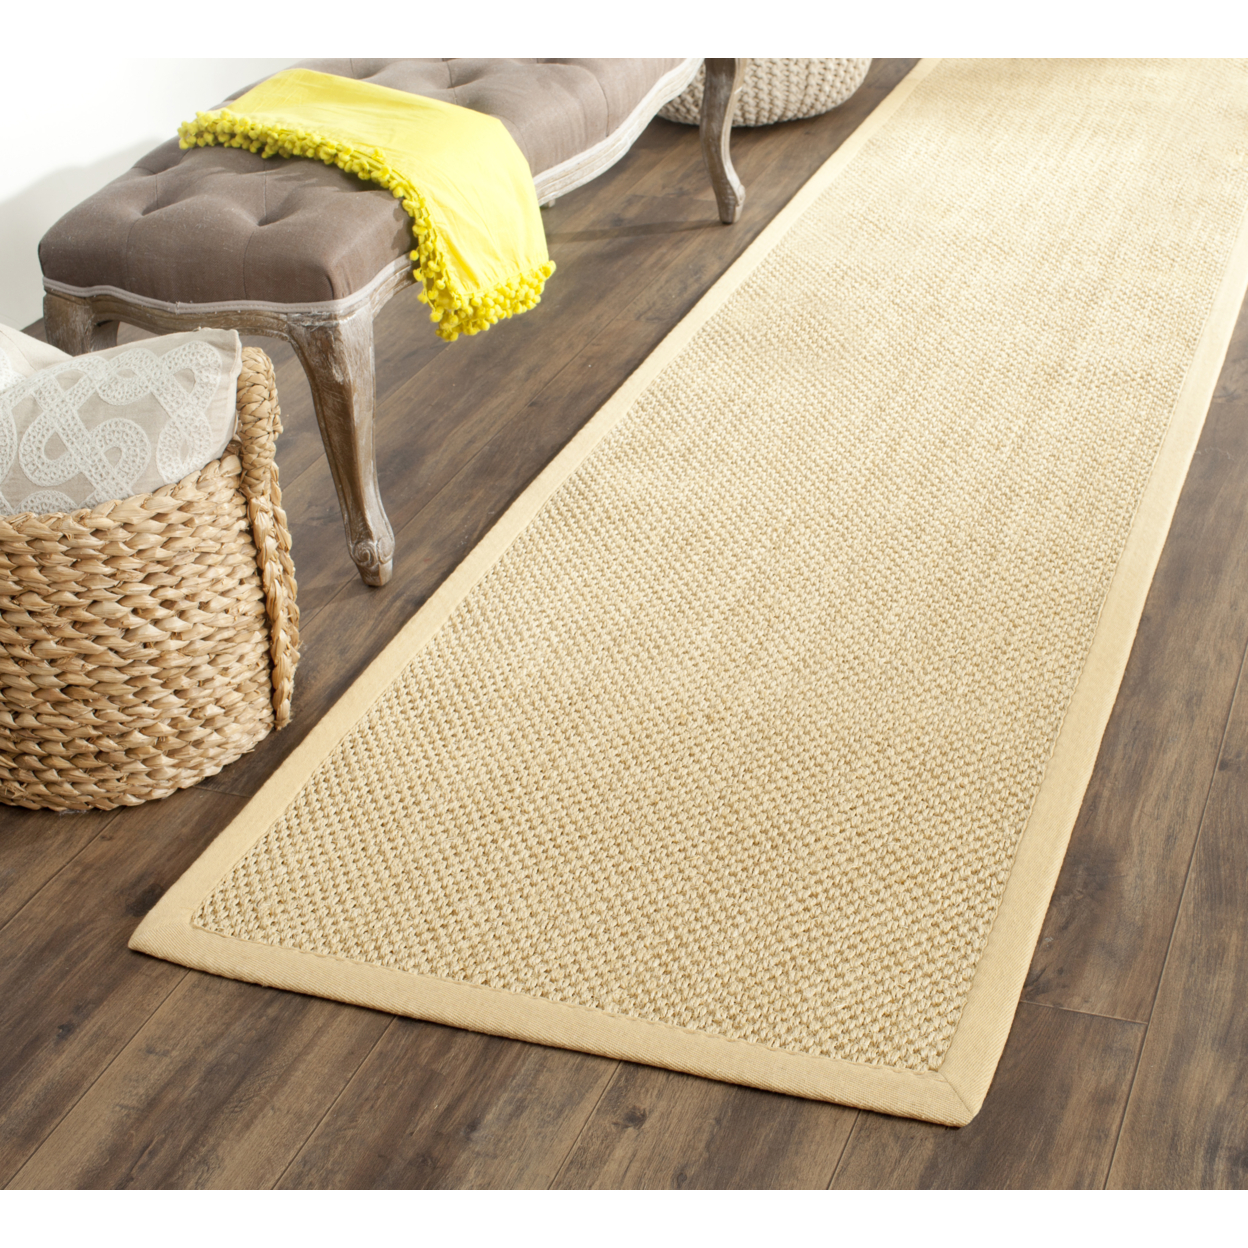 SAFAVIEH Natural Fiber Collection NF443A Maize/Wheat Rug - 6' Square